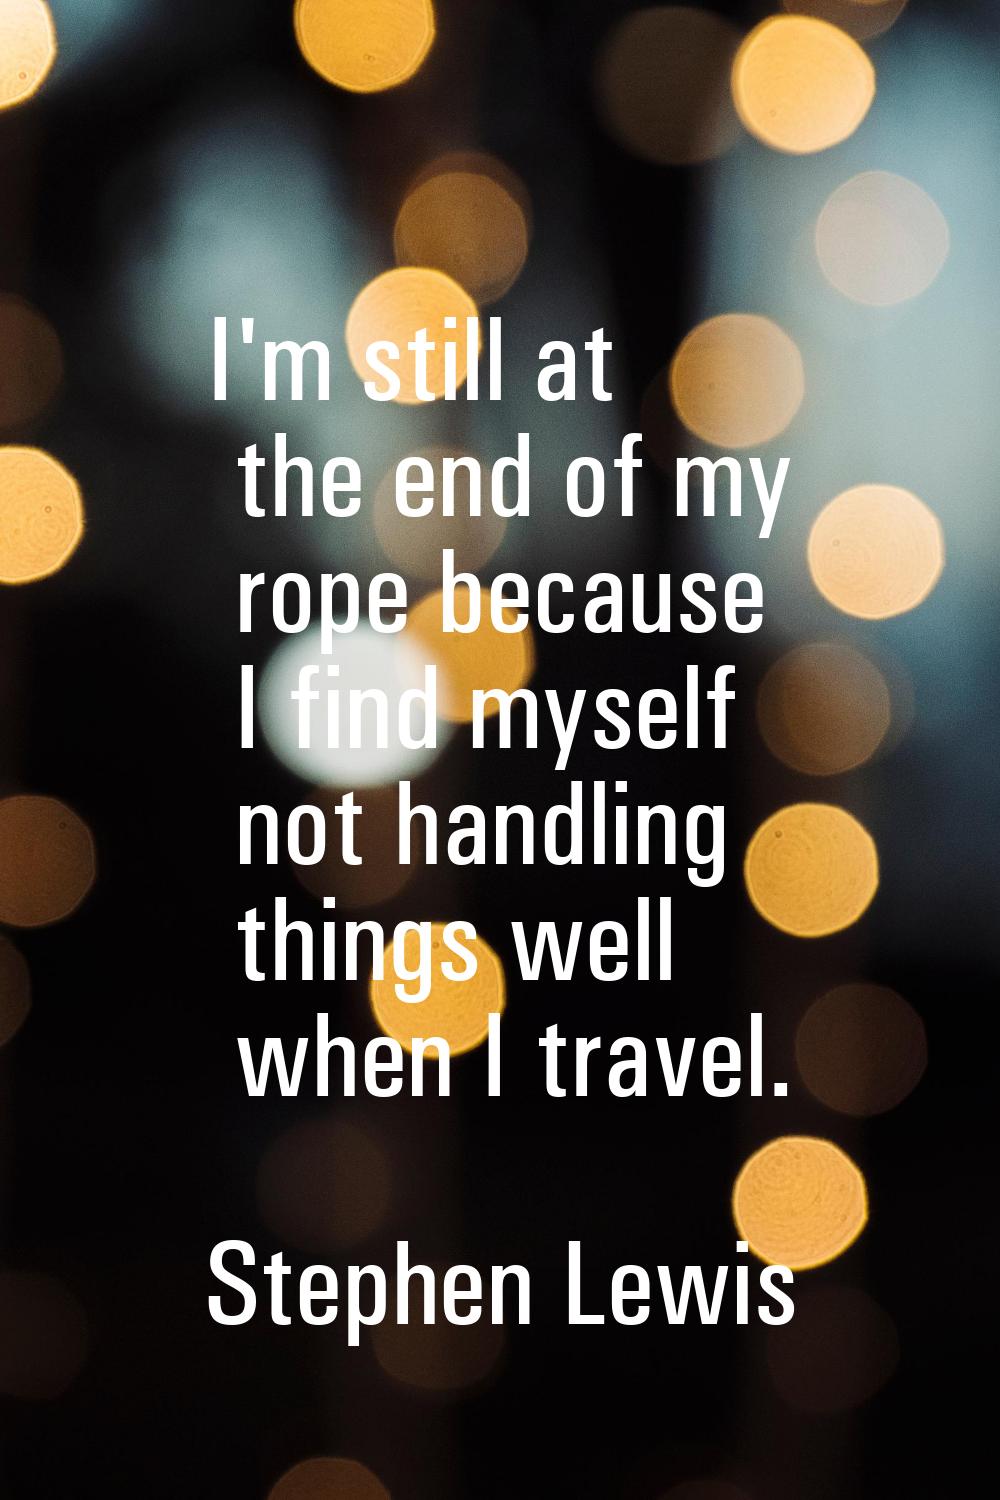 I'm still at the end of my rope because I find myself not handling things well when I travel.